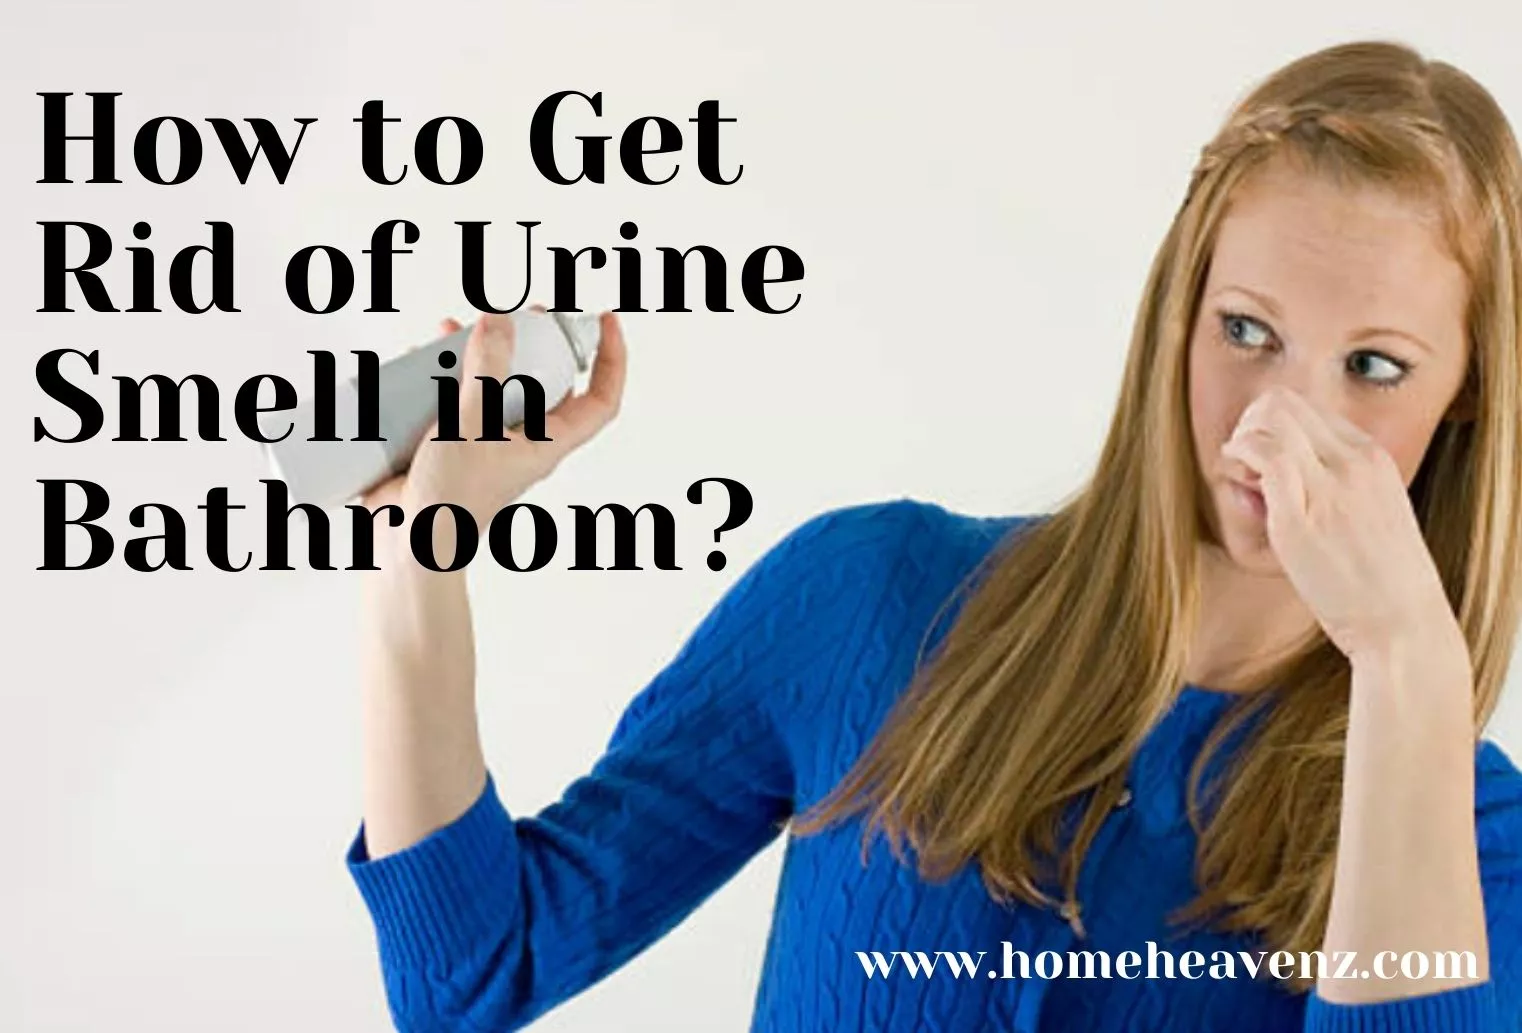 How to Get Rid of Urine Smell in Bathroom